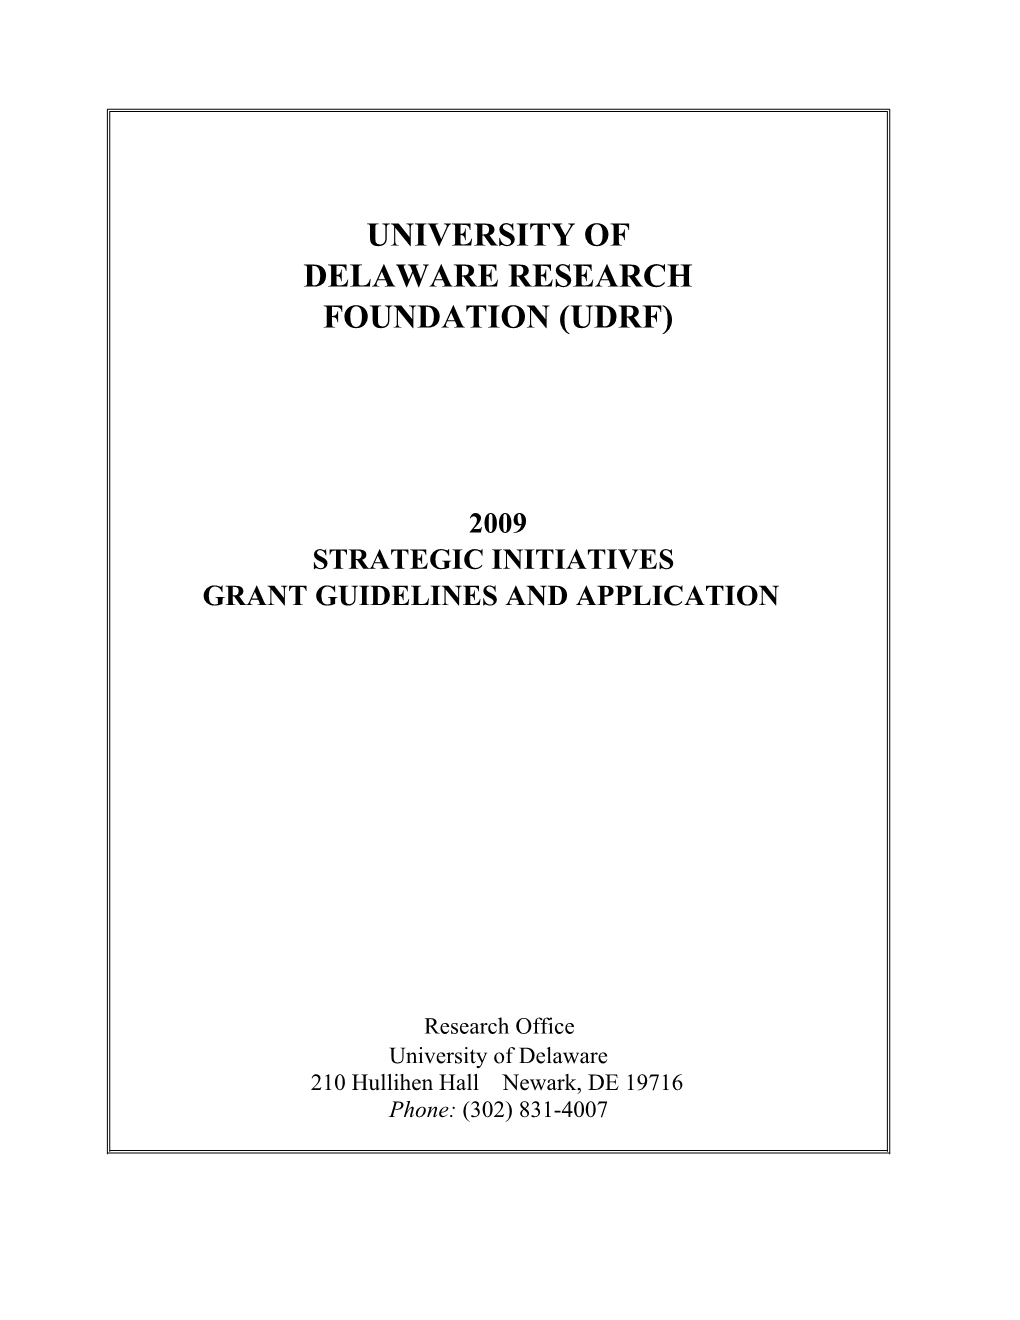 University of Delaware Research Foundation (Udrf)